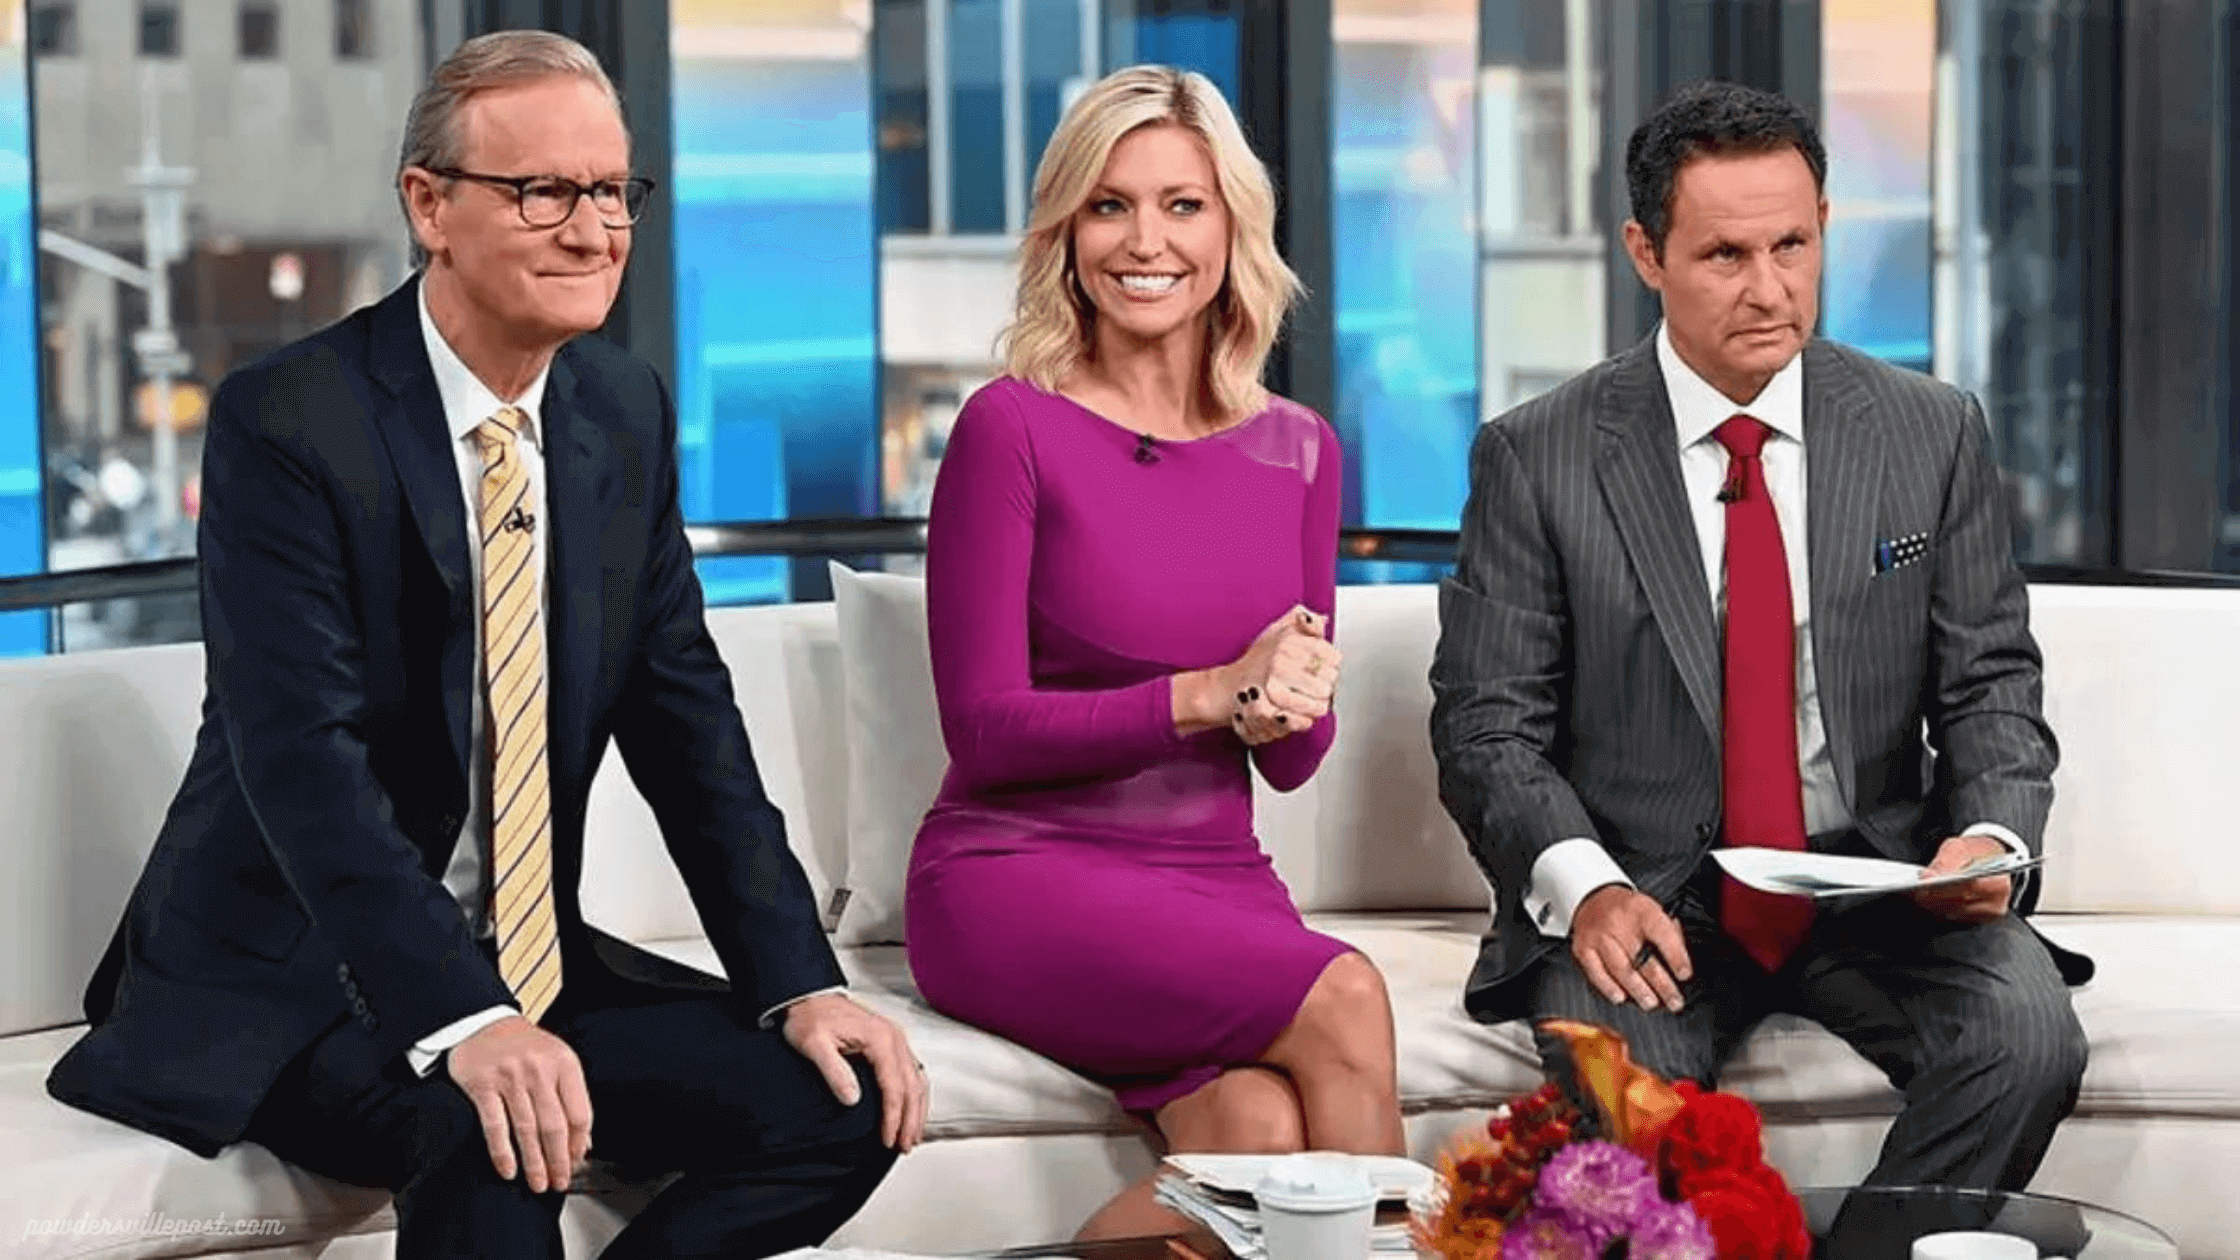 Who Is The Cast Of Fox And Friends See All The Cast And Crew!